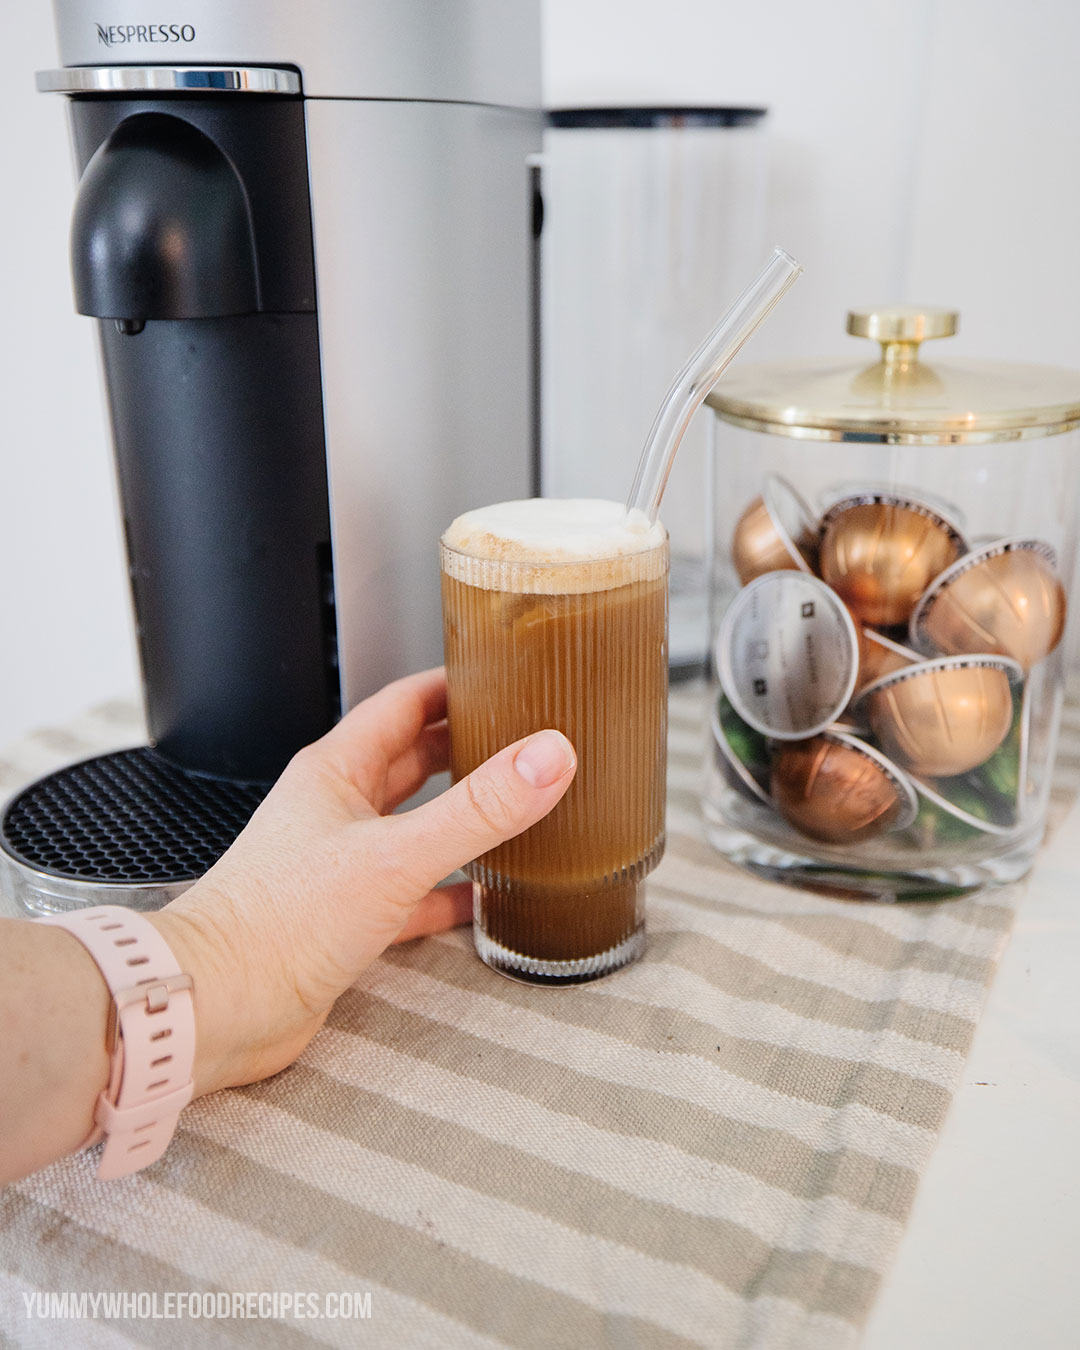 https://yummywholefoodrecipes.com/wp-content/uploads/2023/04/Iced-Coffee-with-Nespresso-Vertuo-2.jpg